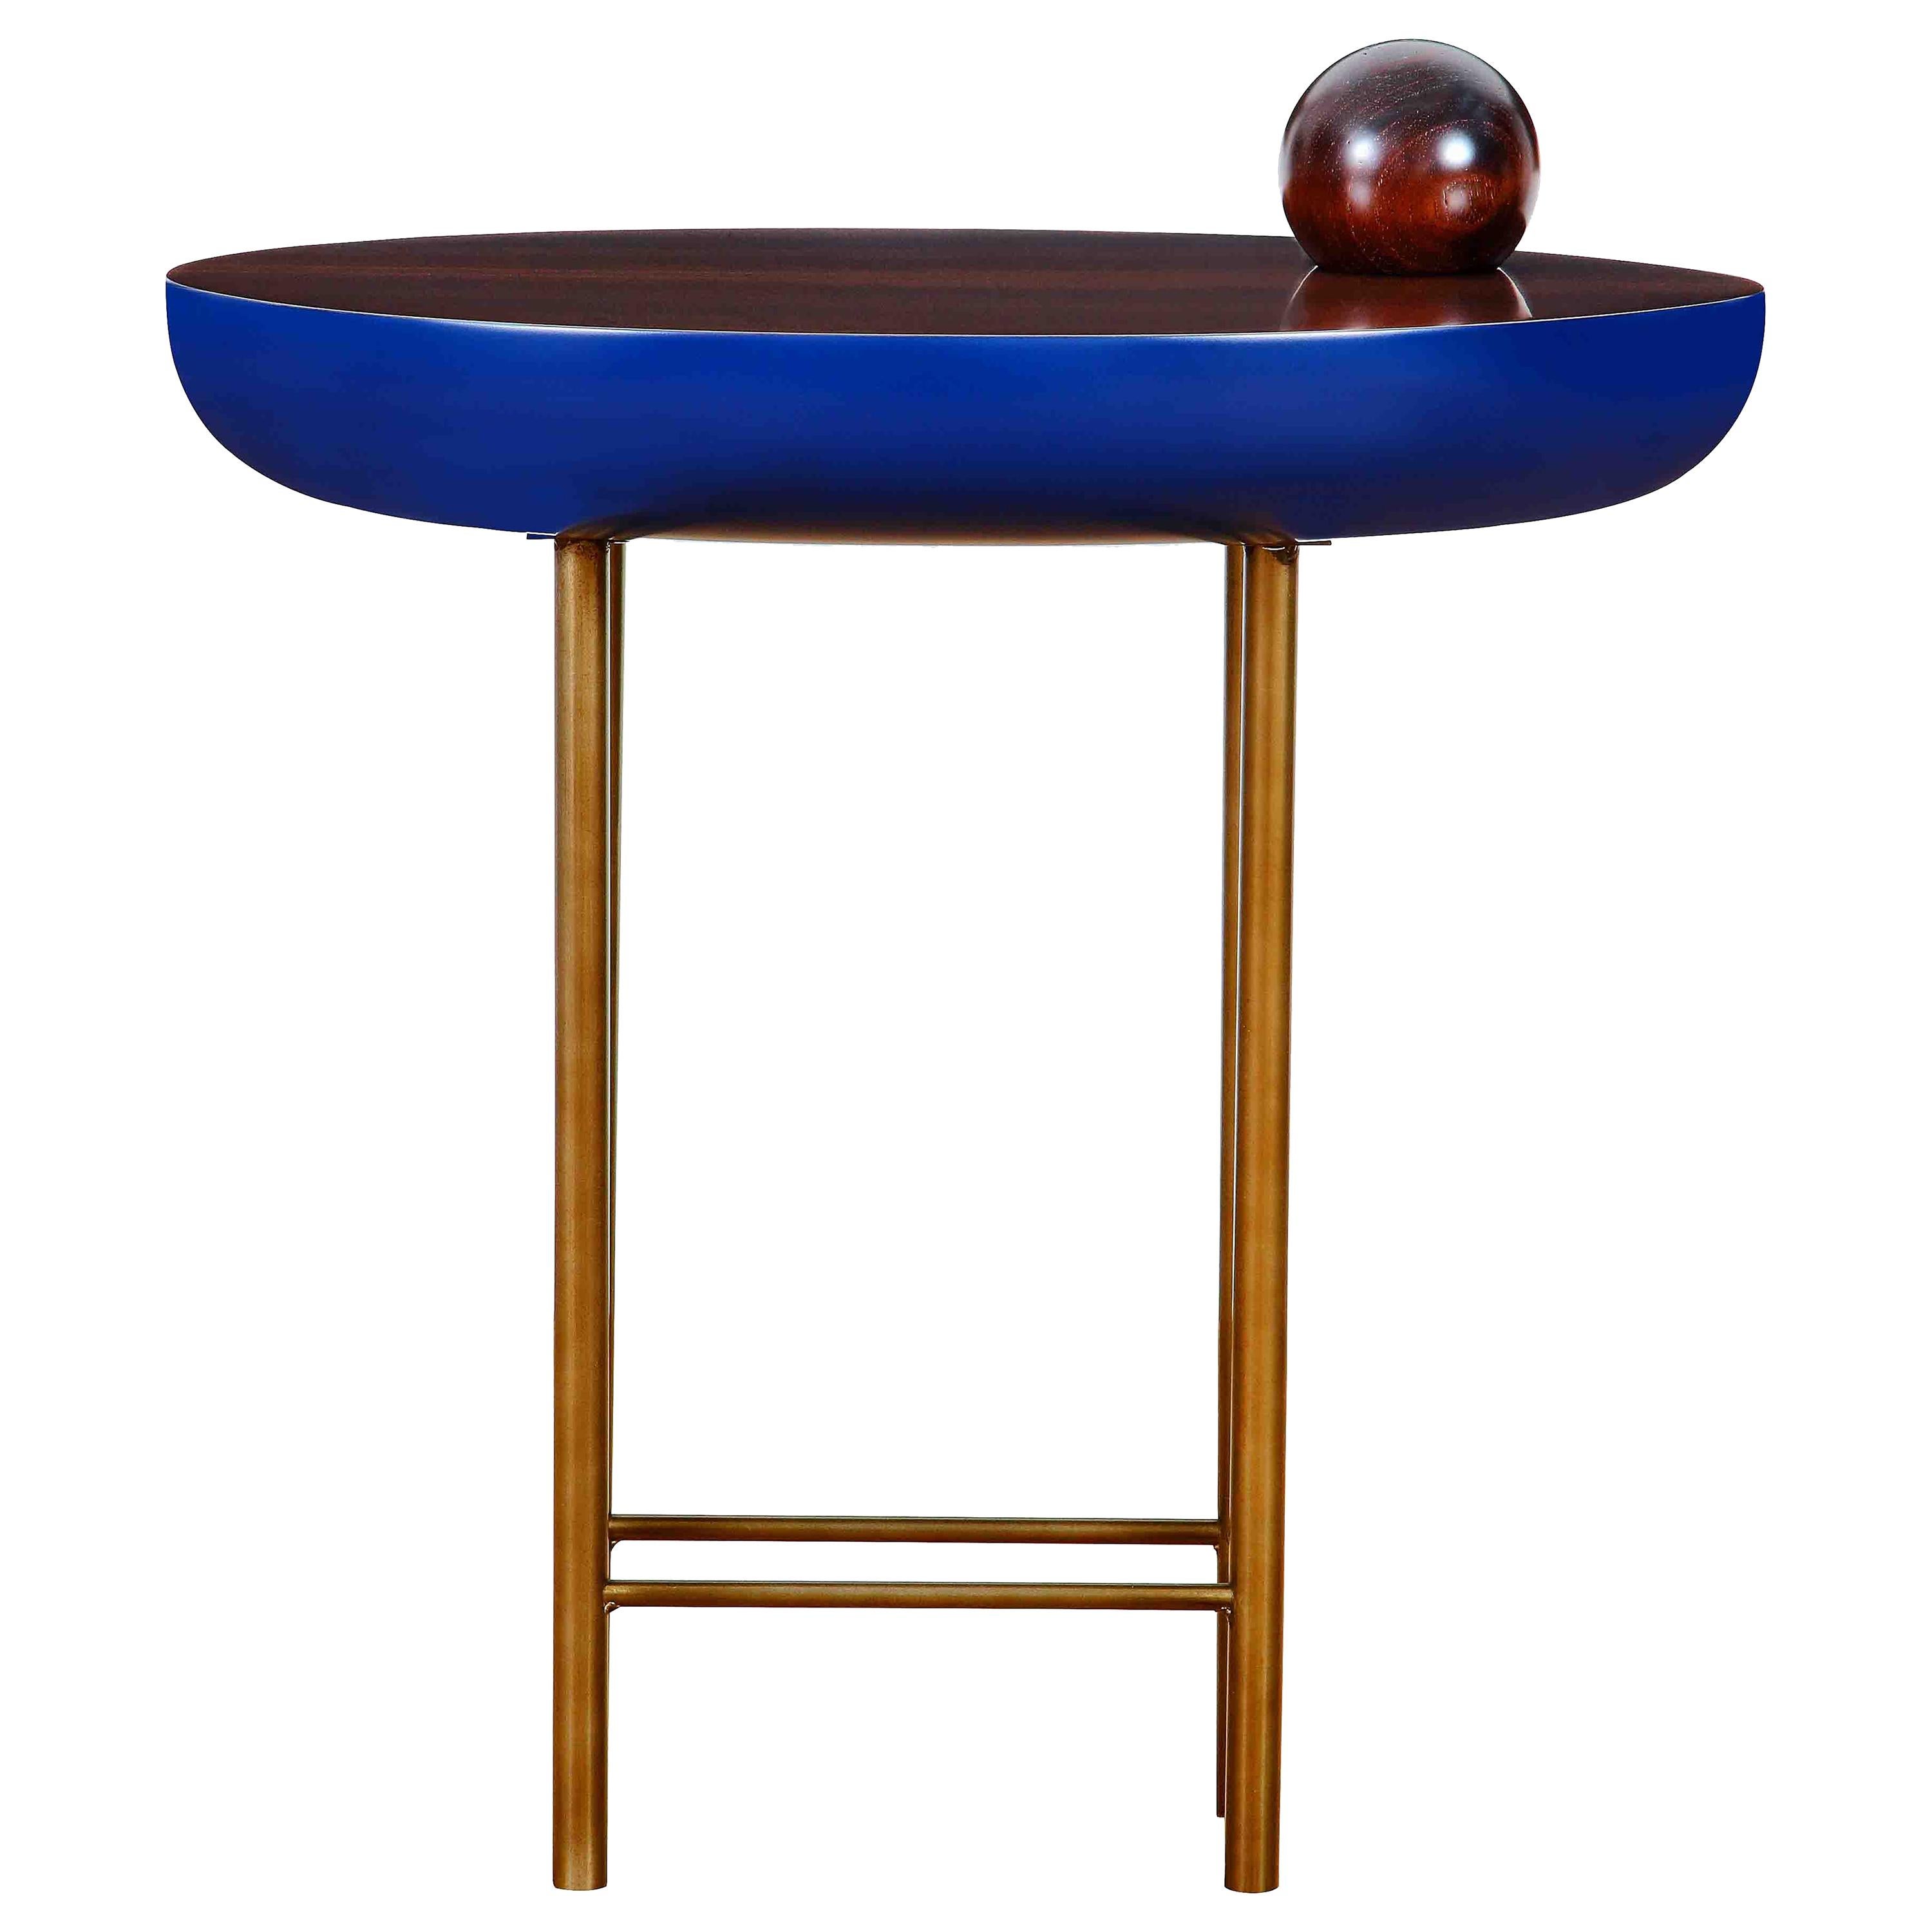 "ORGANIC" Wood and Lacquer Lateral Table